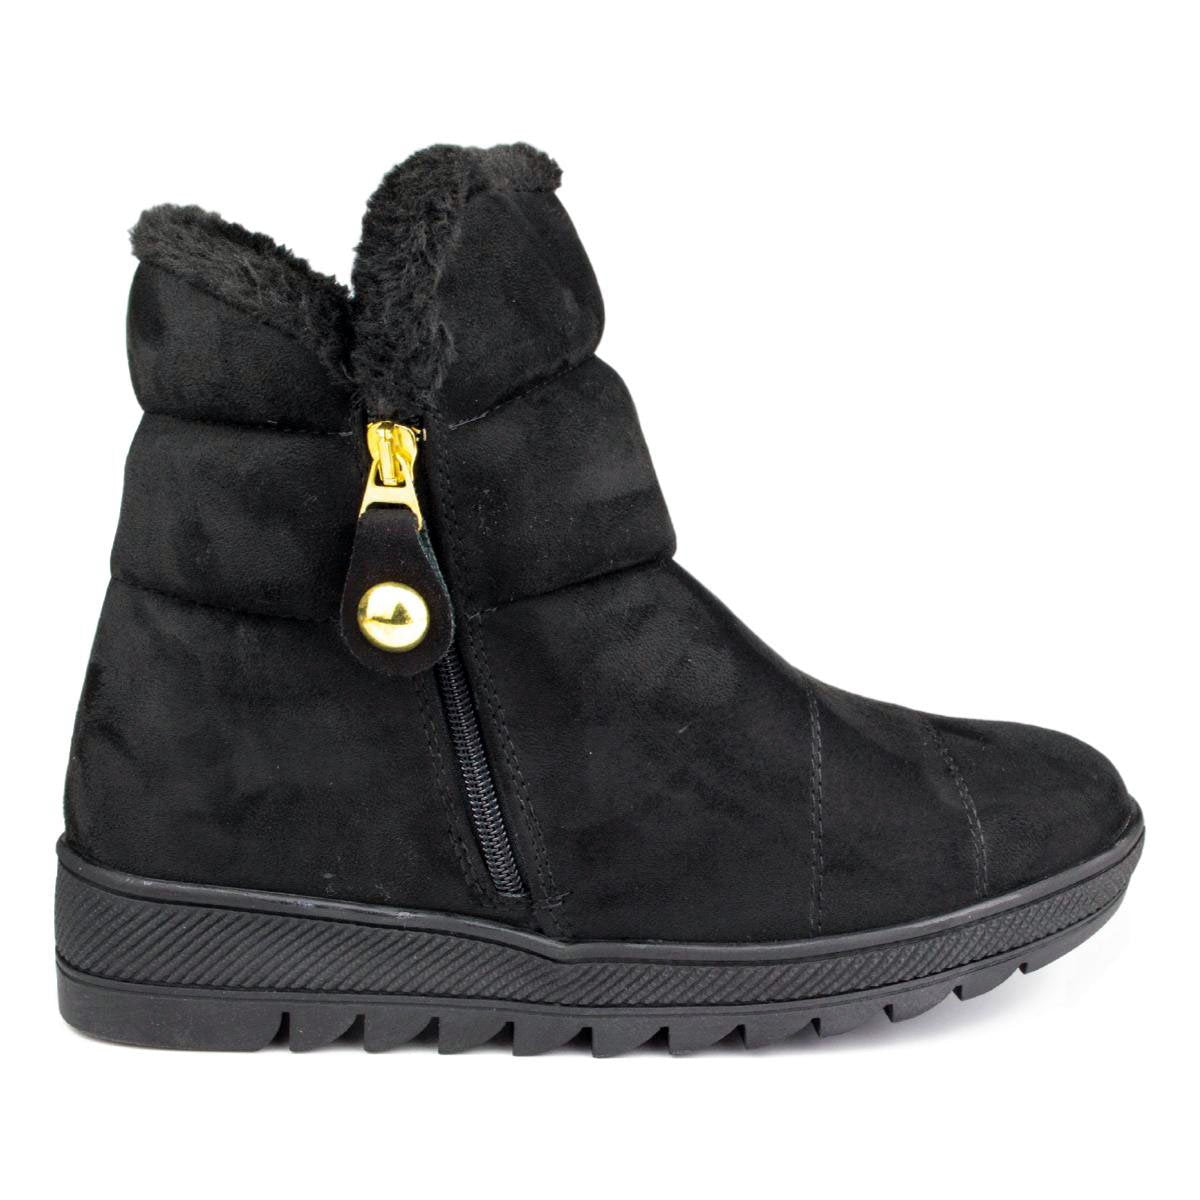 Womens Black Faux Zip Up Boot - Watney Shoes 